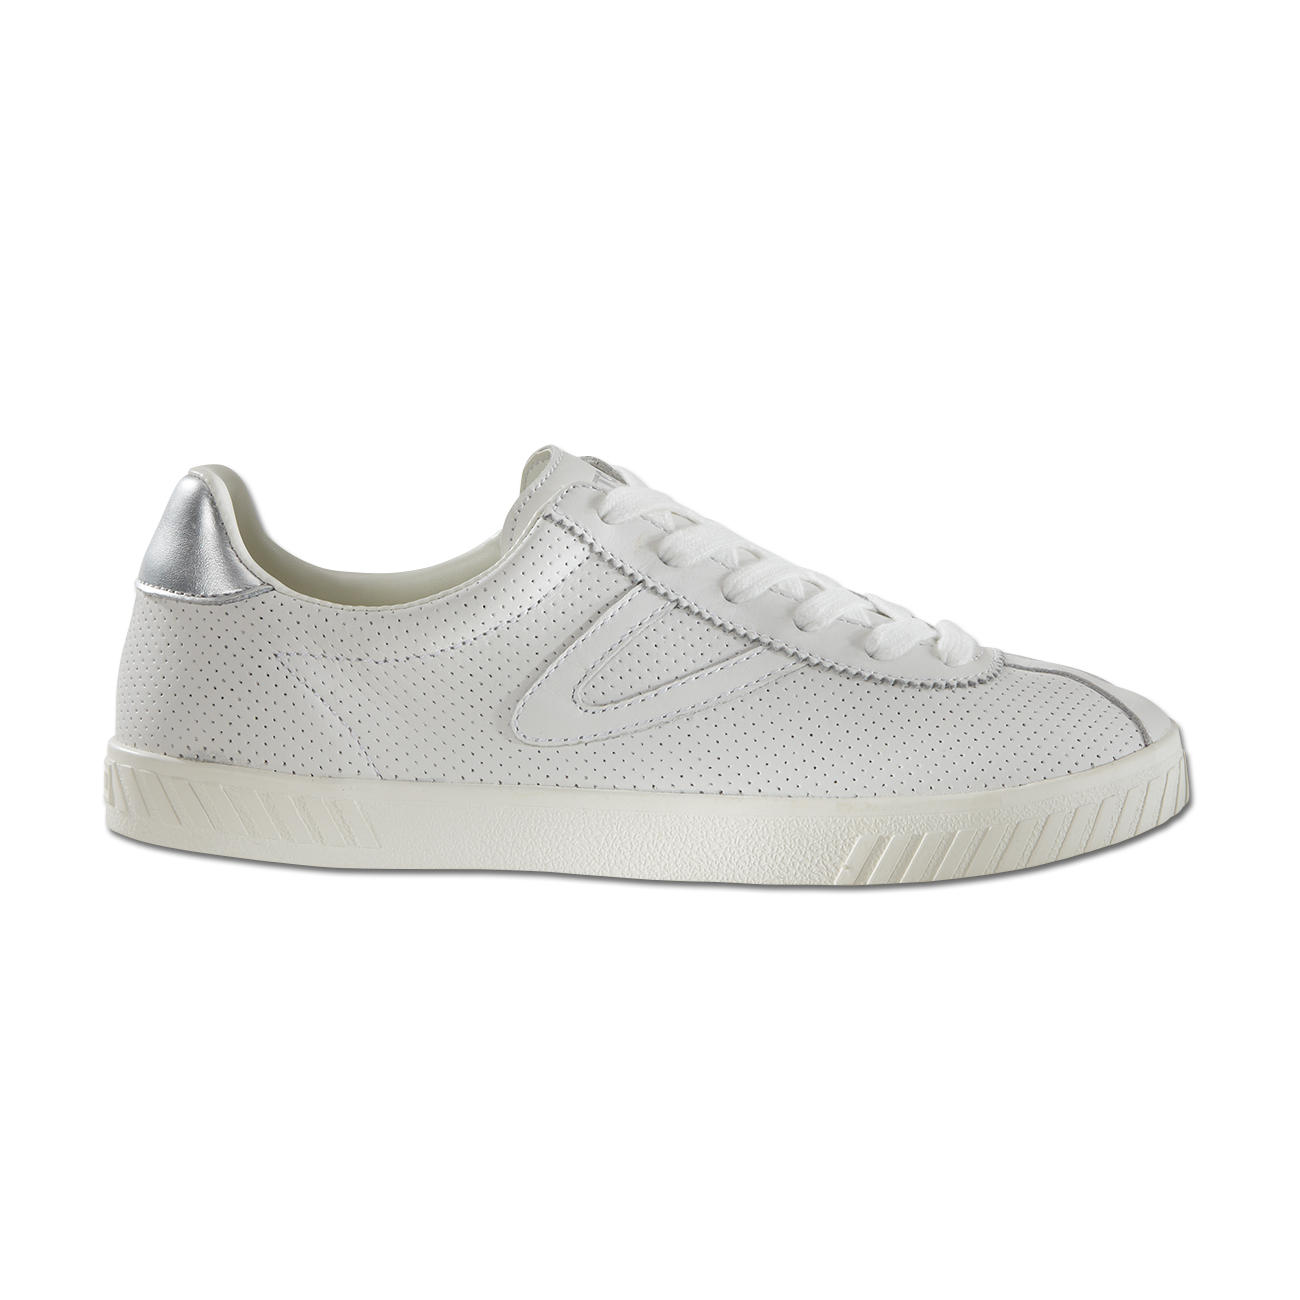 Tretorn Clean Chic Leather Sneakers for Women buy